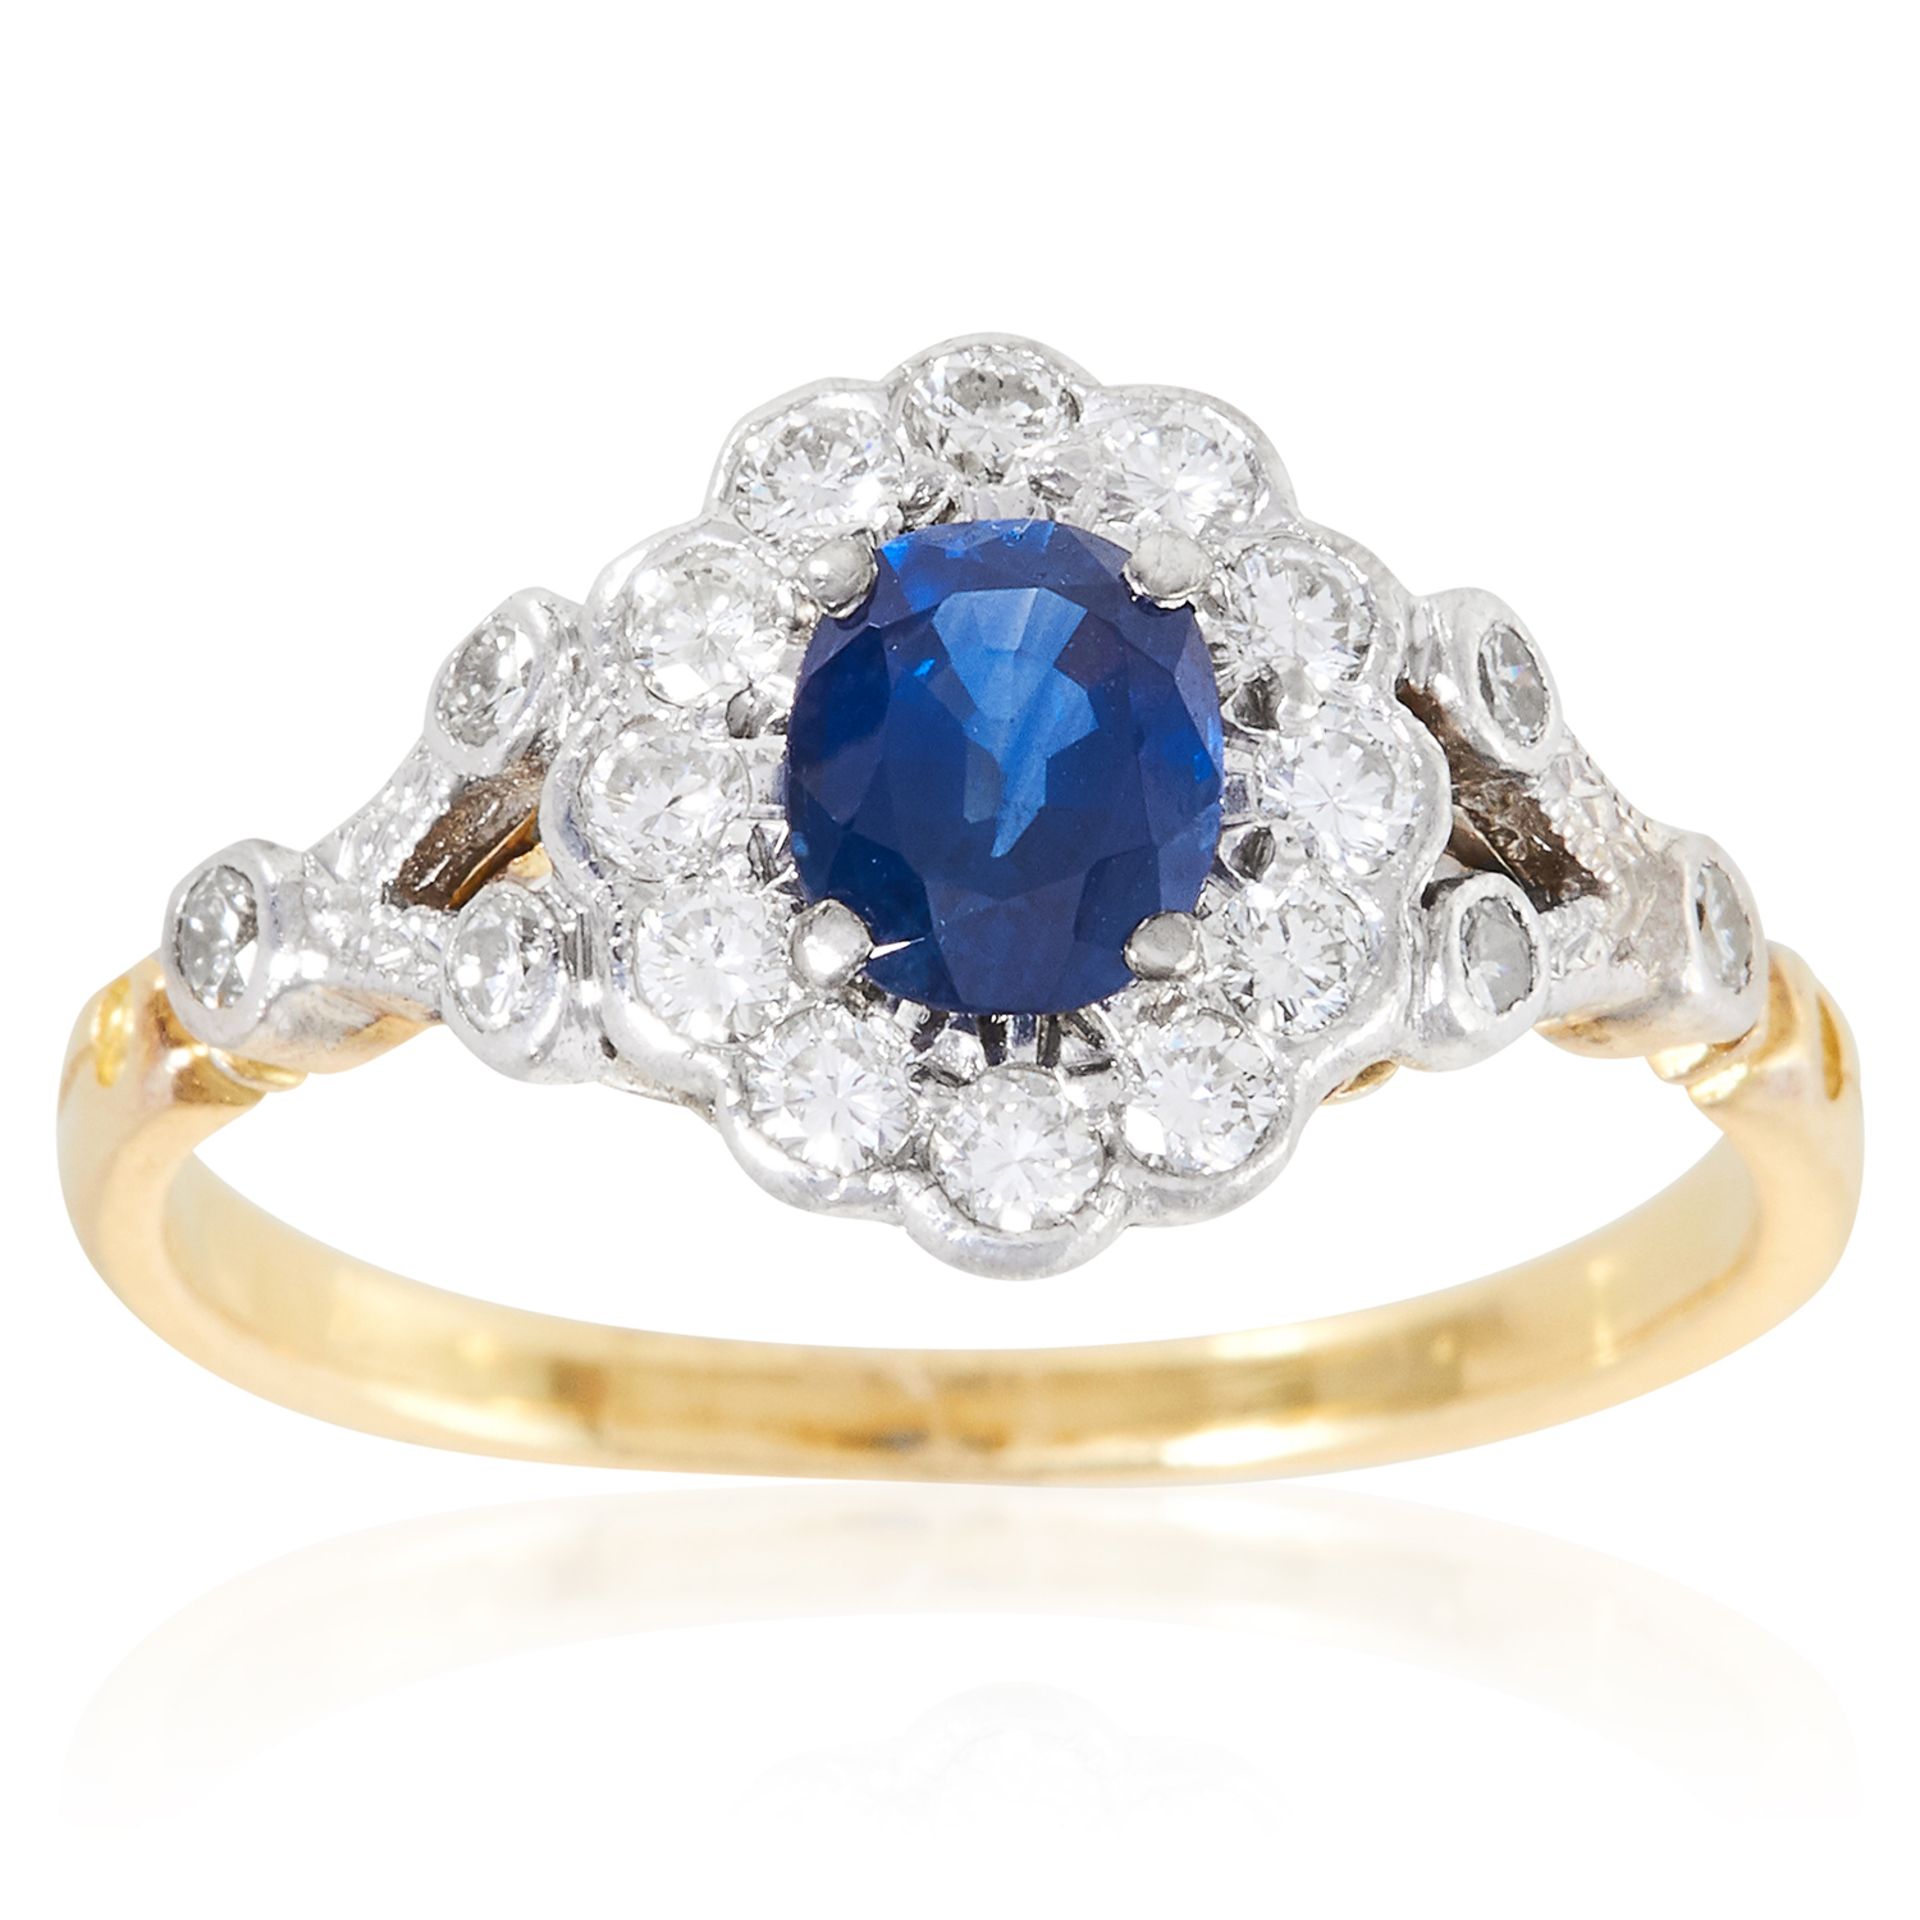 A SAPPHIRE AND DIAMOND CLUSTER RING in high carat yellow gold, set with an oval cut sapphire of